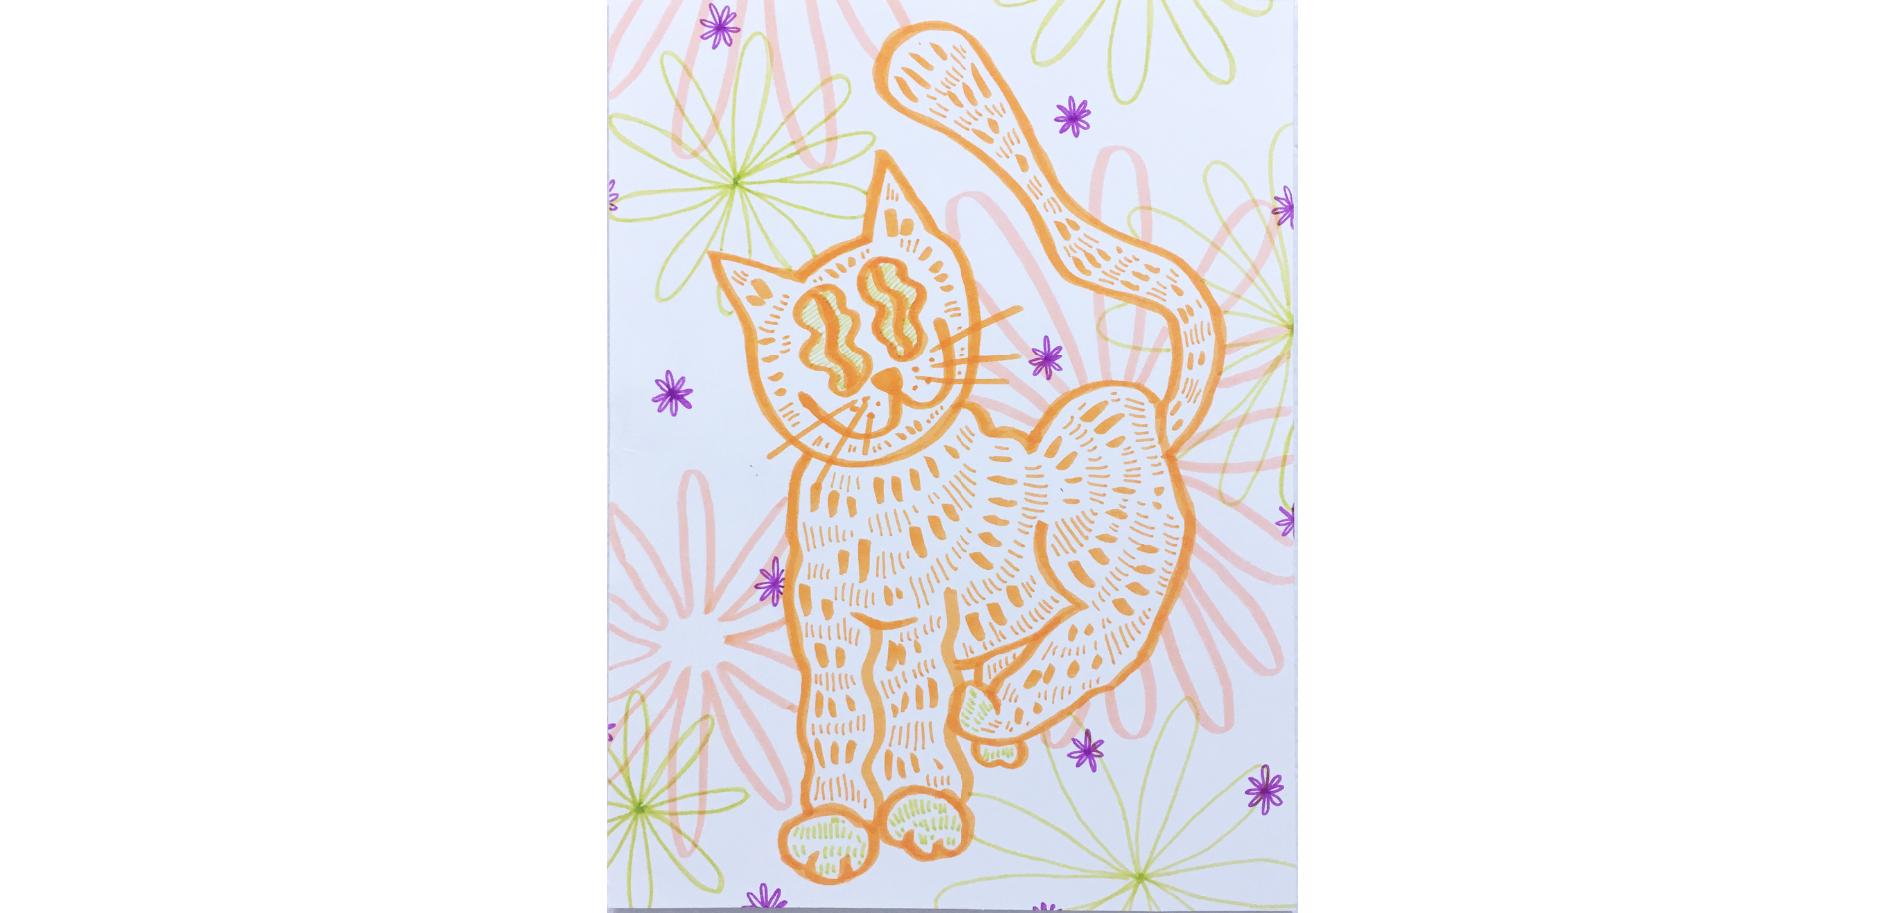 Soft and Fuzzy, Watercolor Paper Drawing, Cat with Flowers, Graphic Wavy Pattern - Gray Figurative Art by SarahGrace